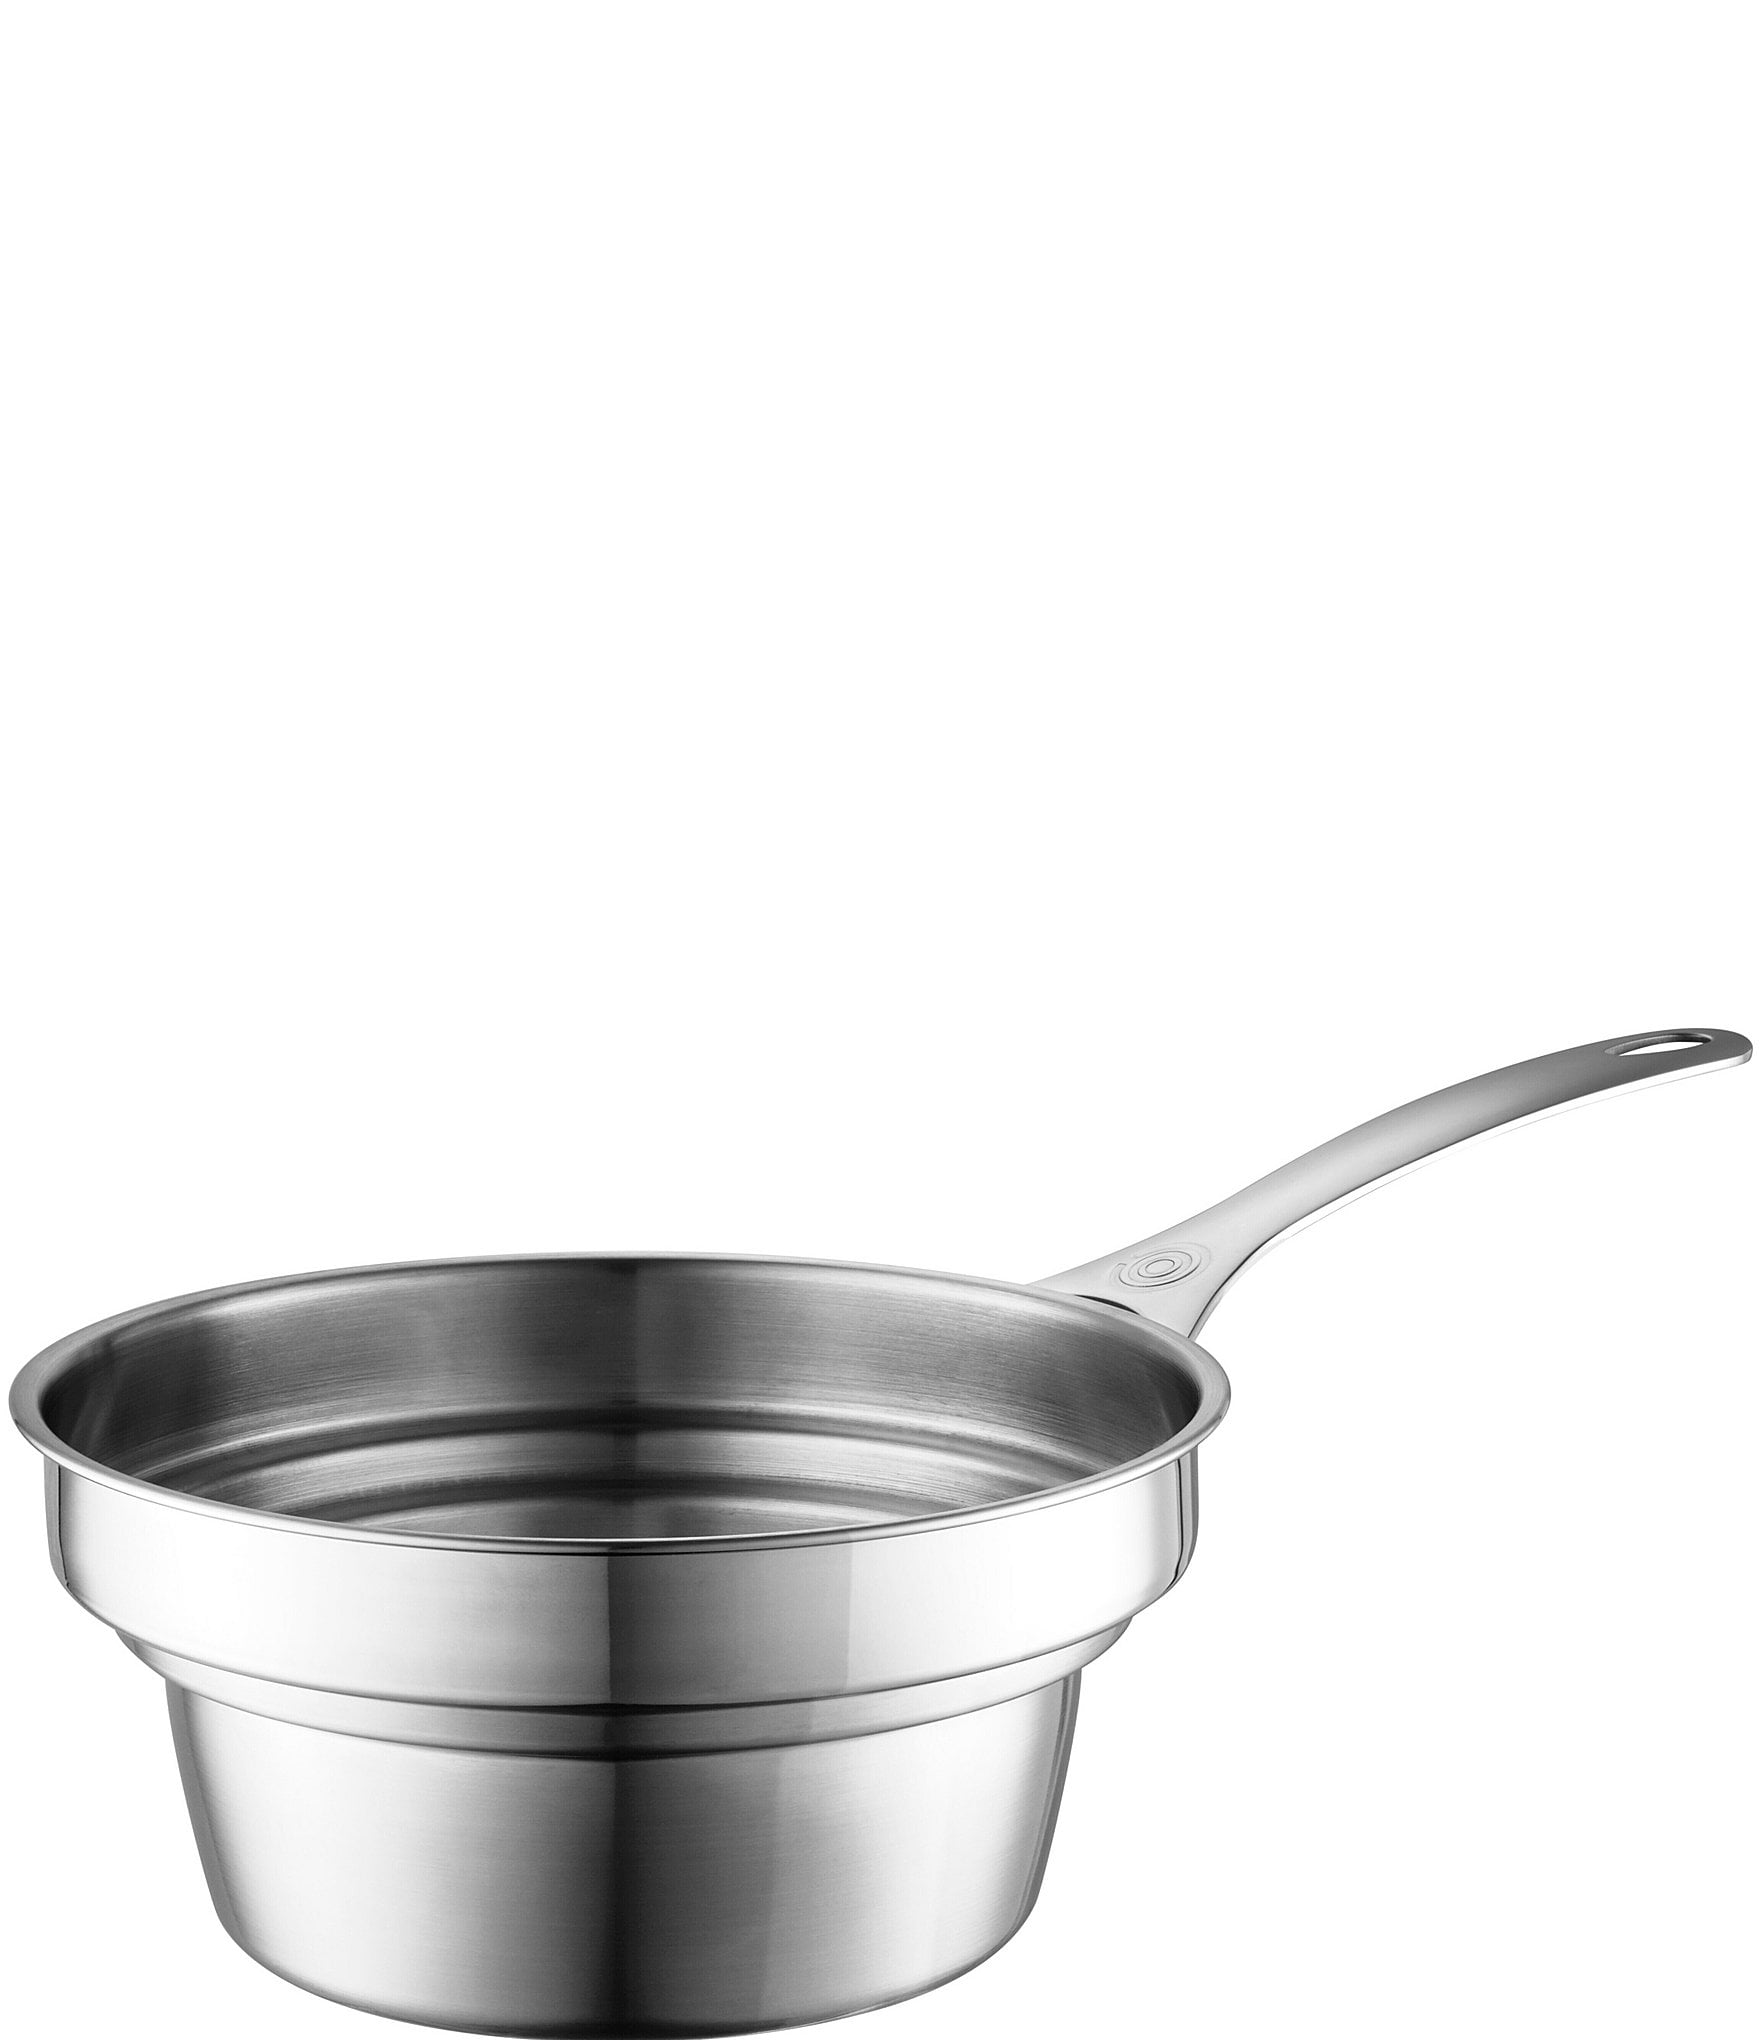 Grand Gourmet Double Boiler Stainless steel, 2 qt